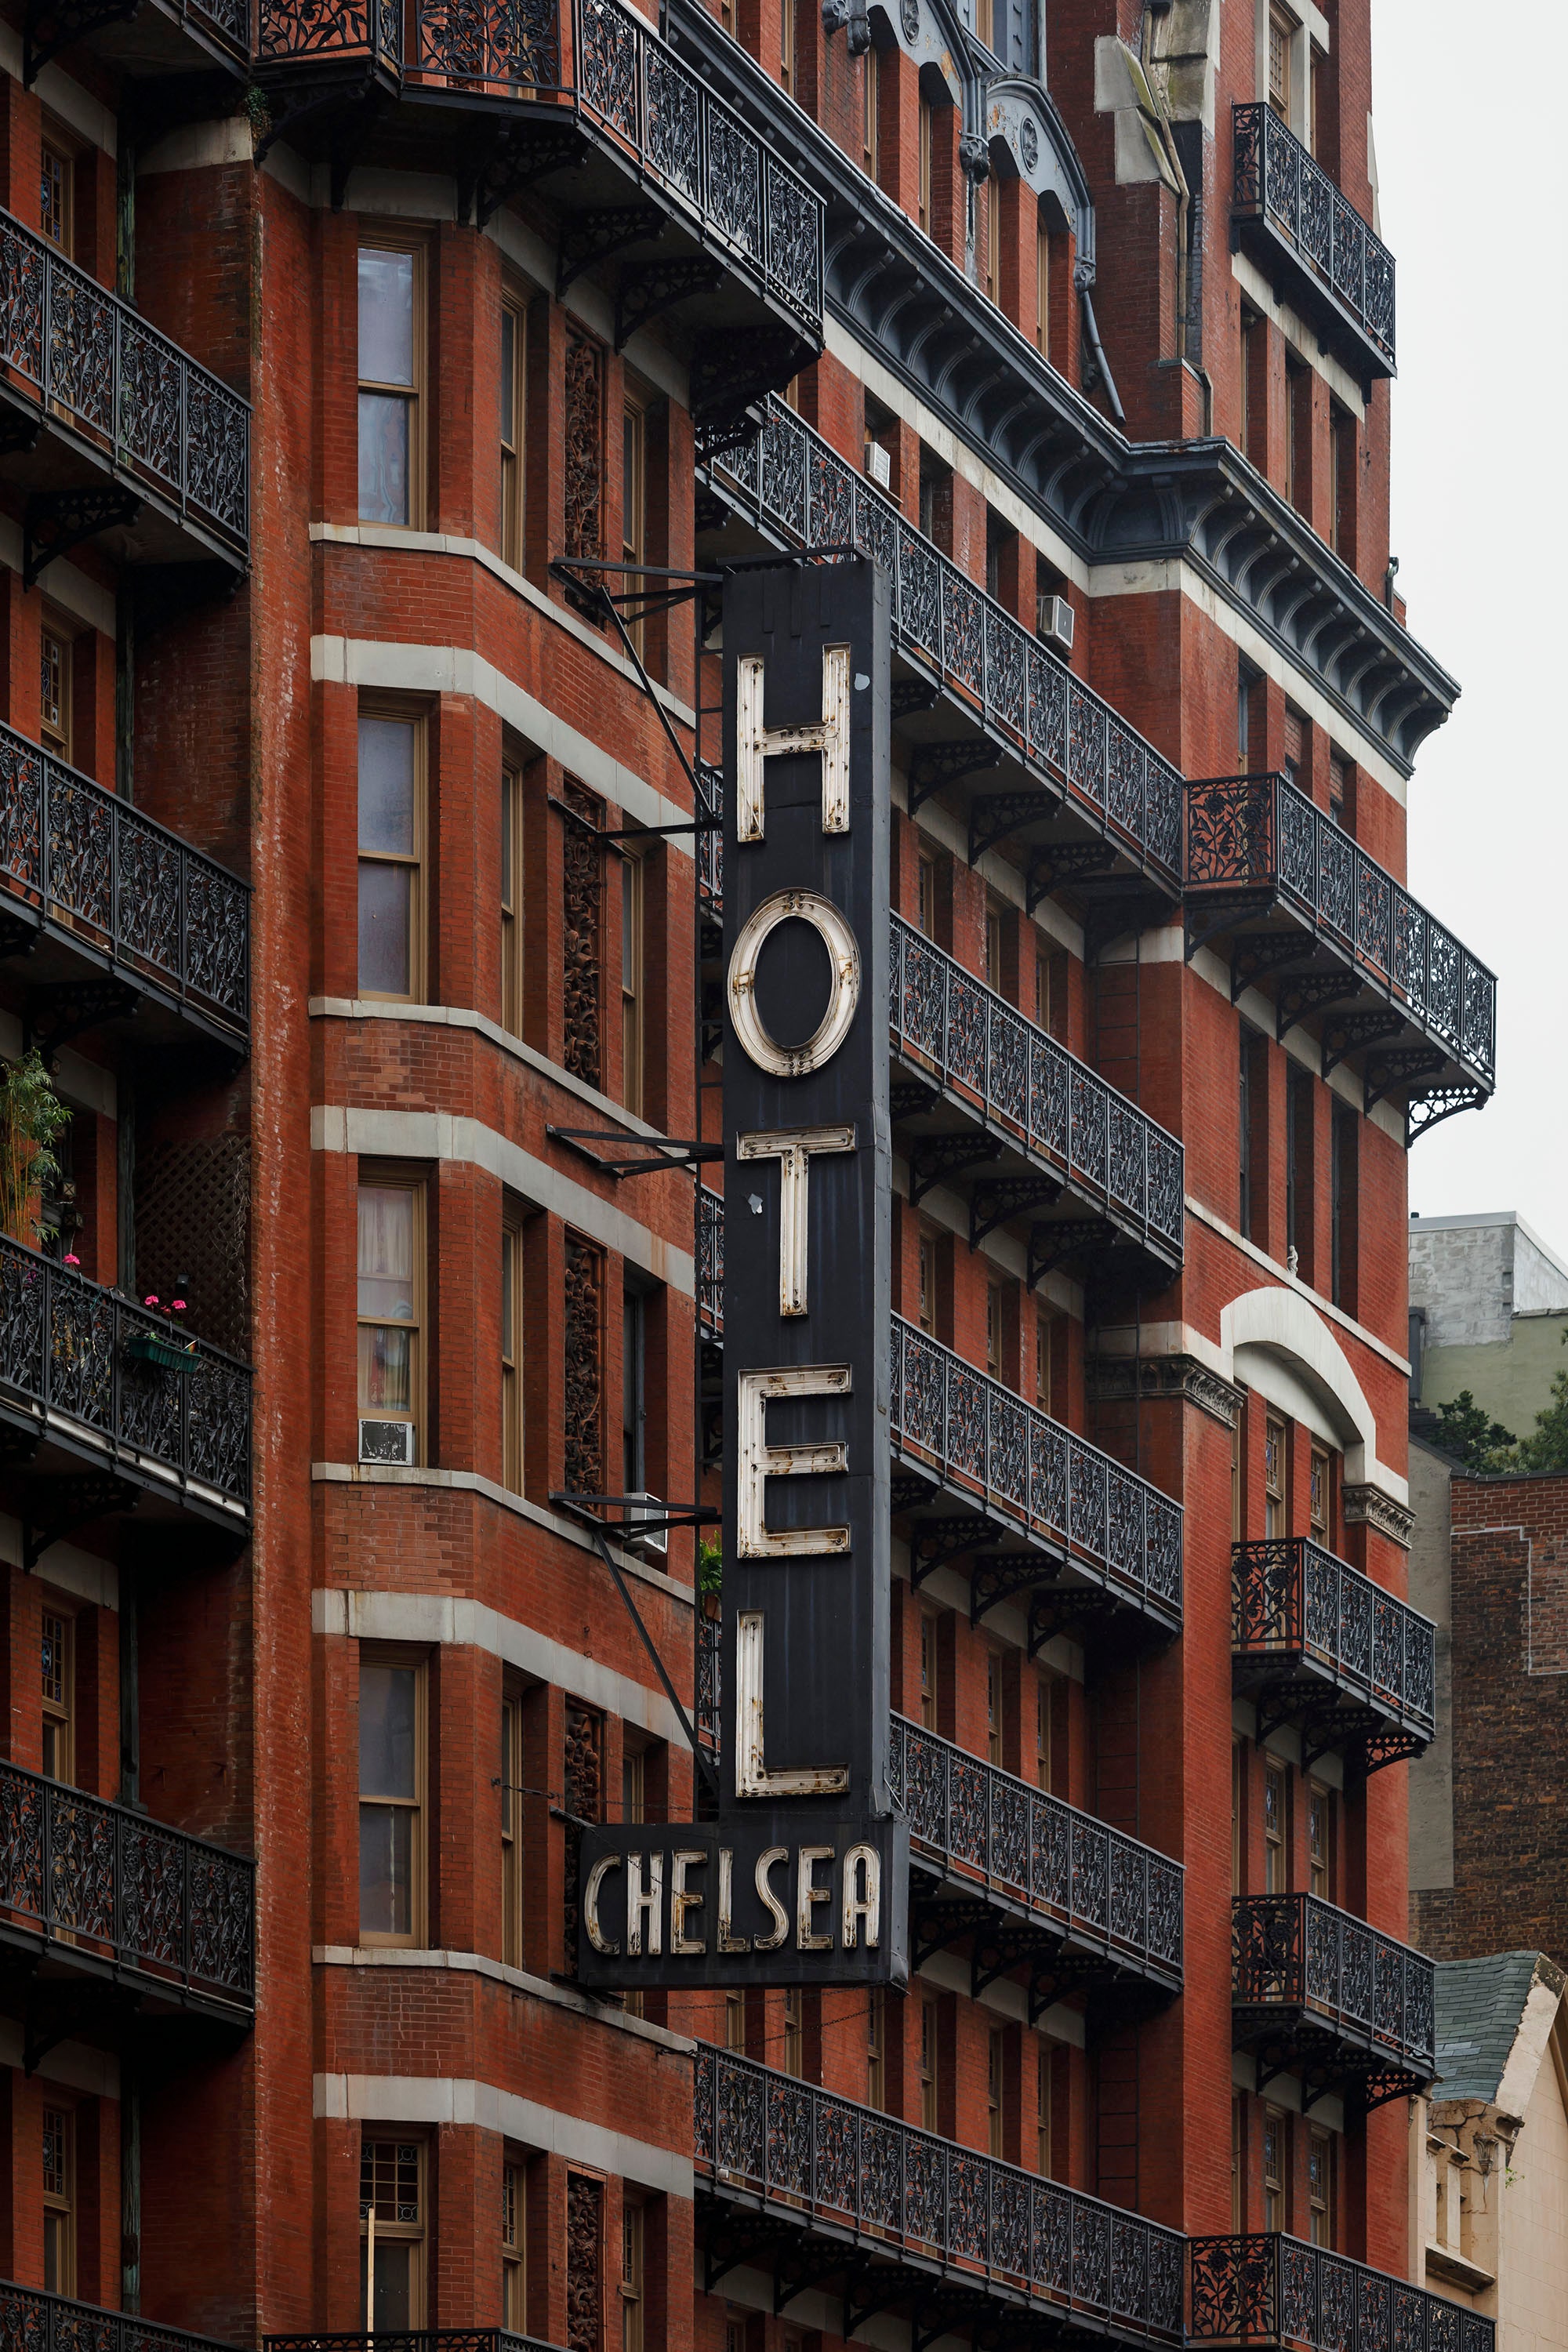 Chelsea Hotel: I remember you well...